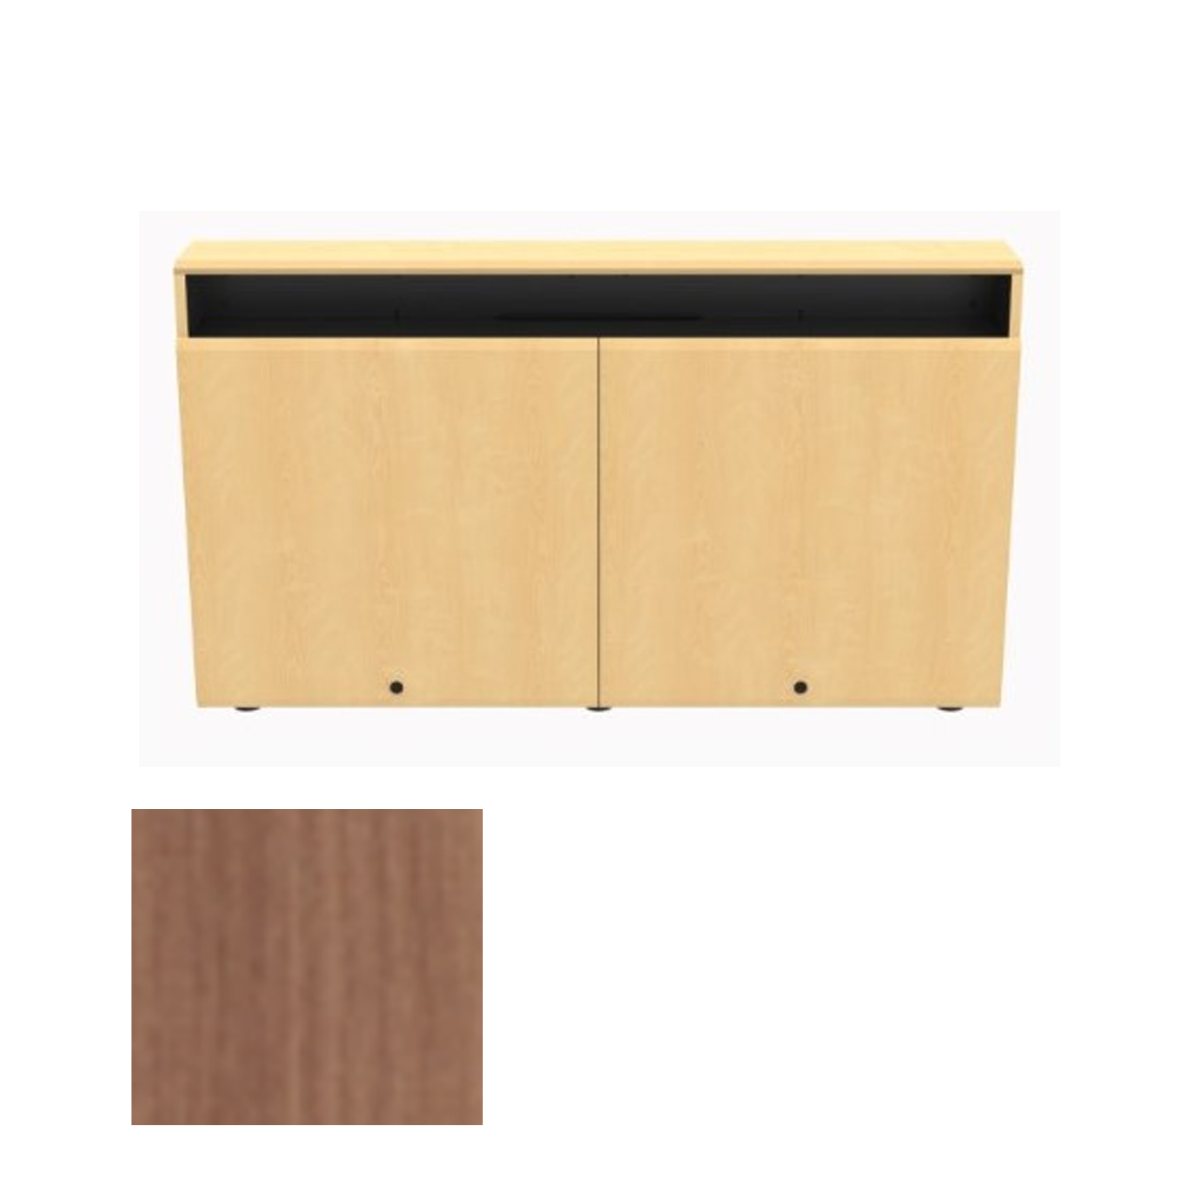 CR2-WM RCT Dual Rack Wall Mounted Credenza - River Cherry